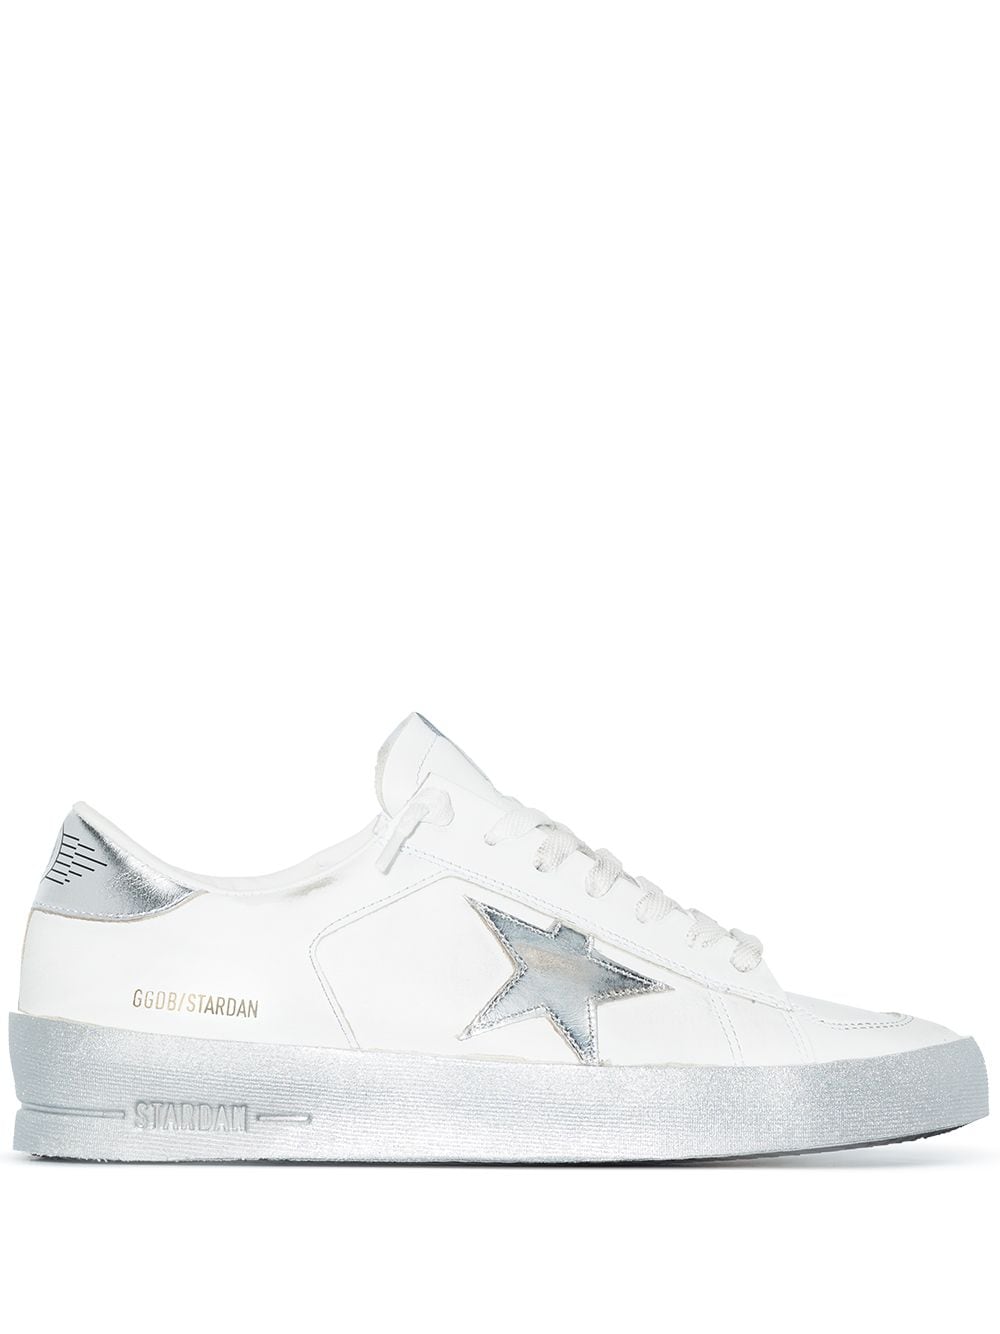 White/silver-tone leather/fabric Stardan low-top sneakers